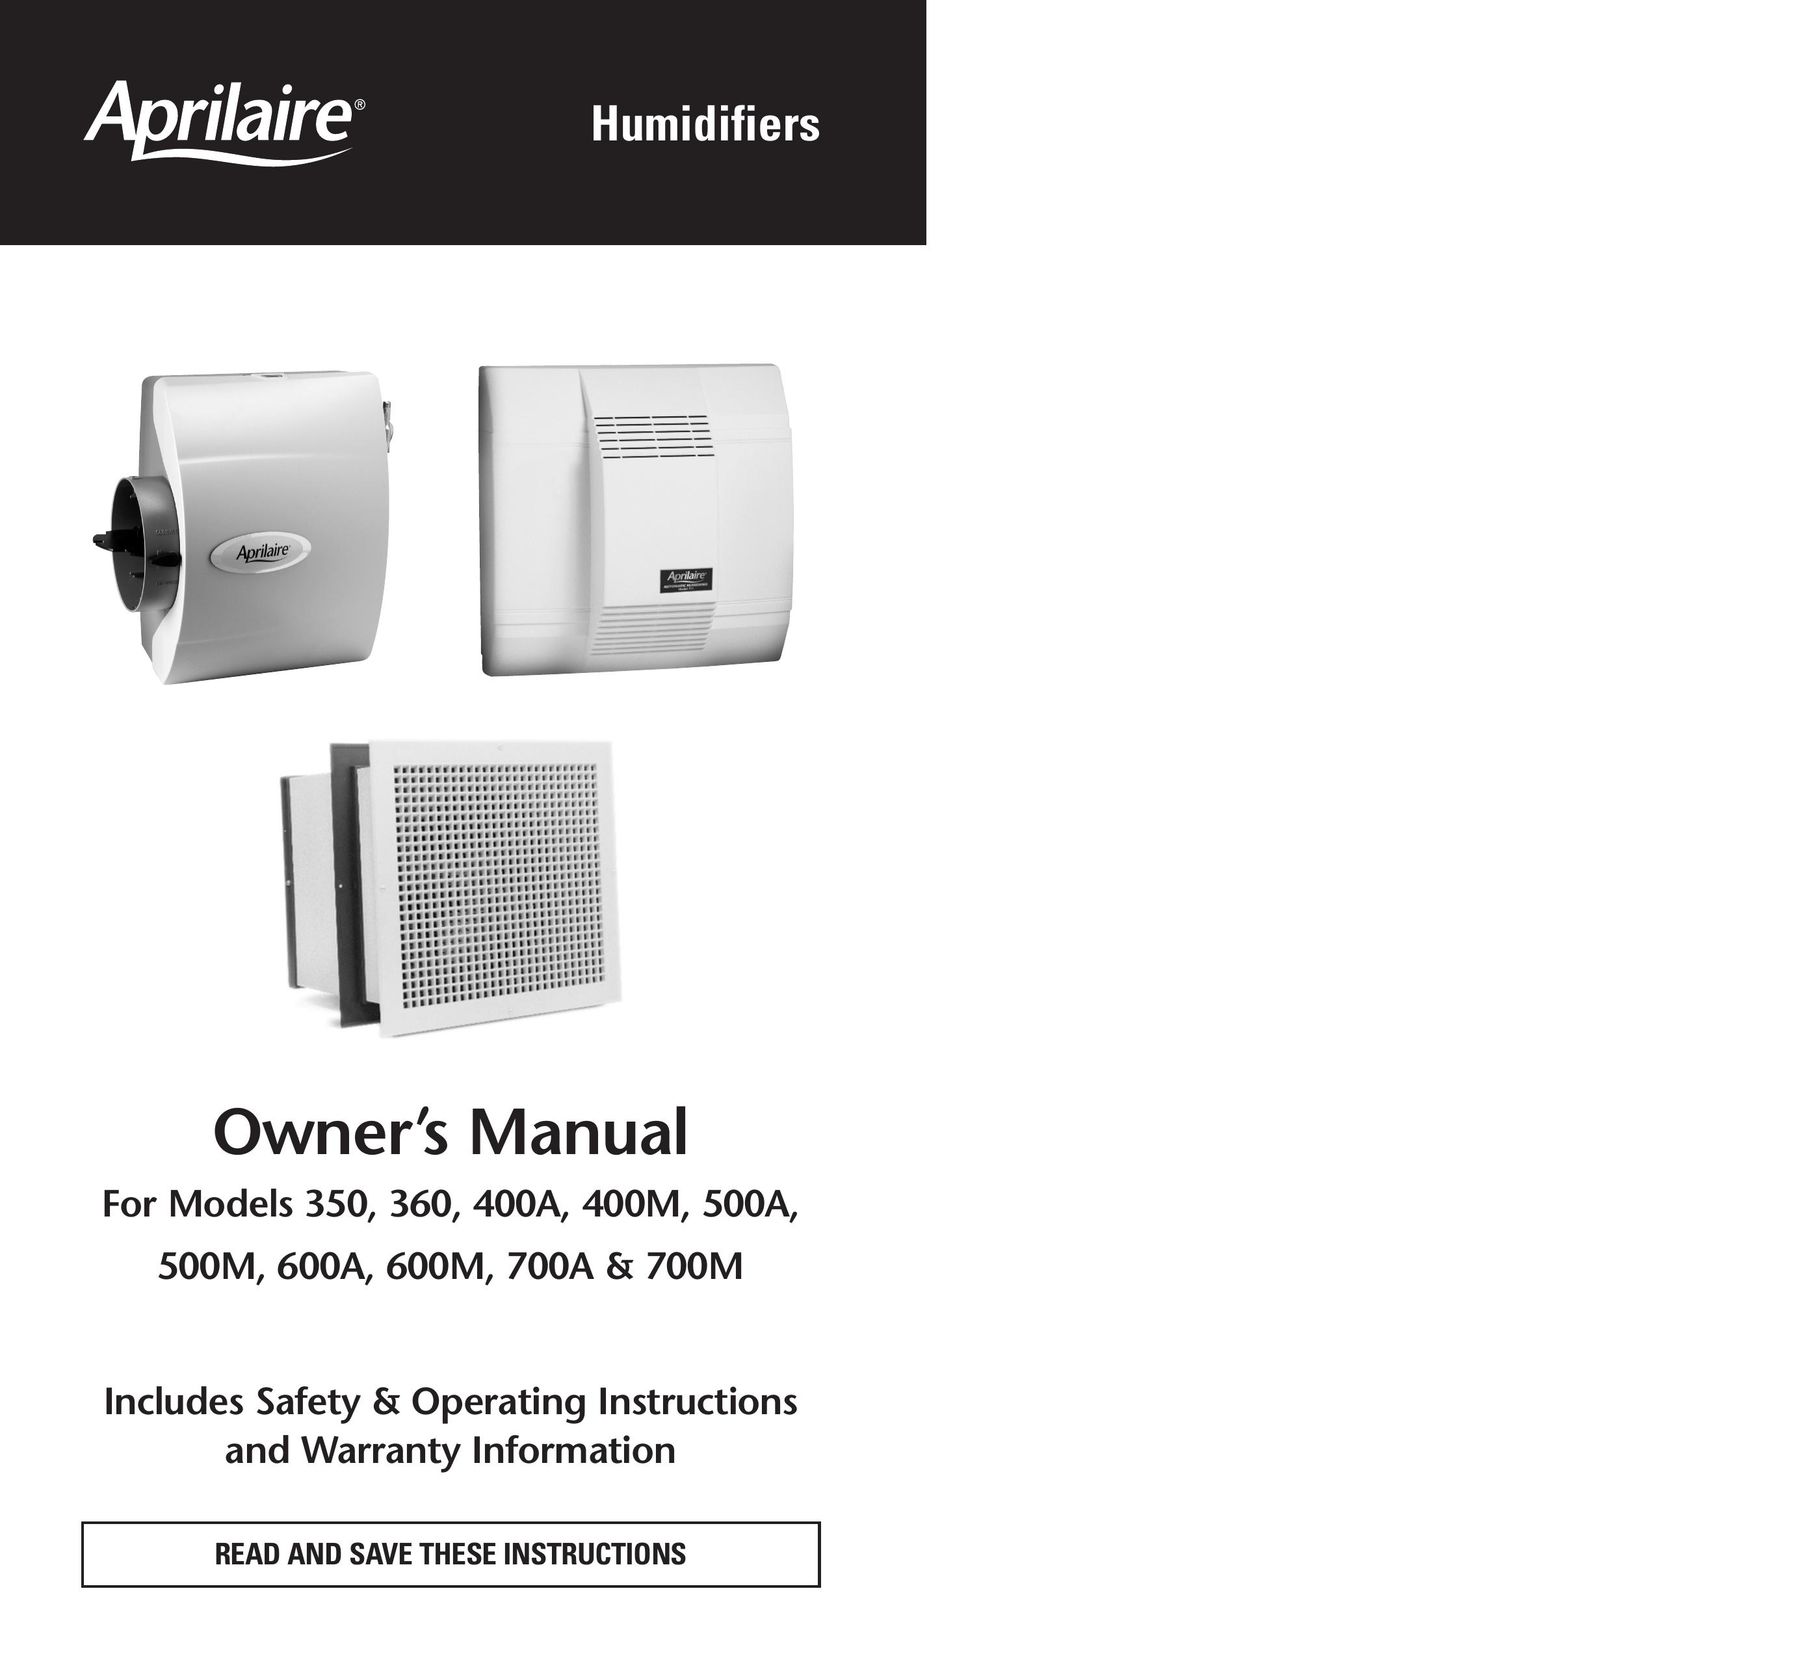 Aprilaire 700A Humidifier User Manual